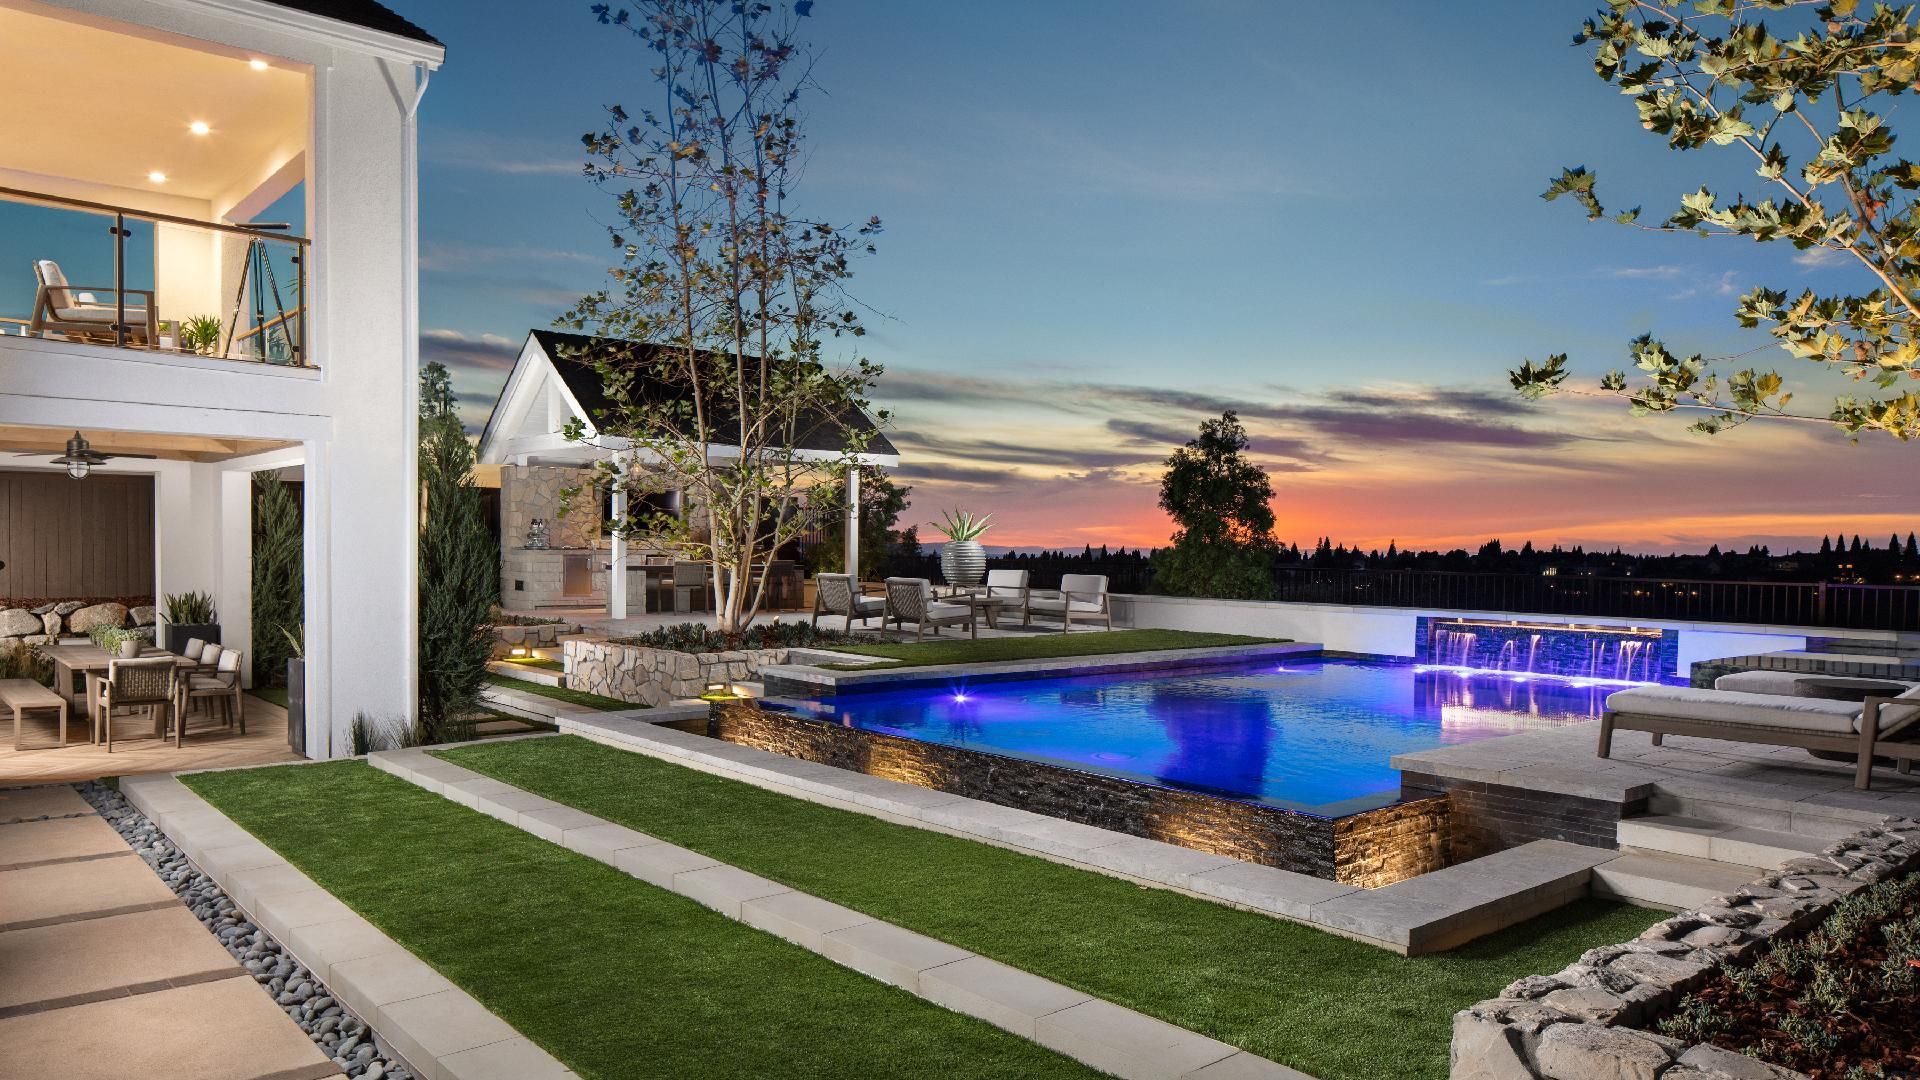 Luxury homes for sale in Rocklin, CA - luxury backyard with a pool